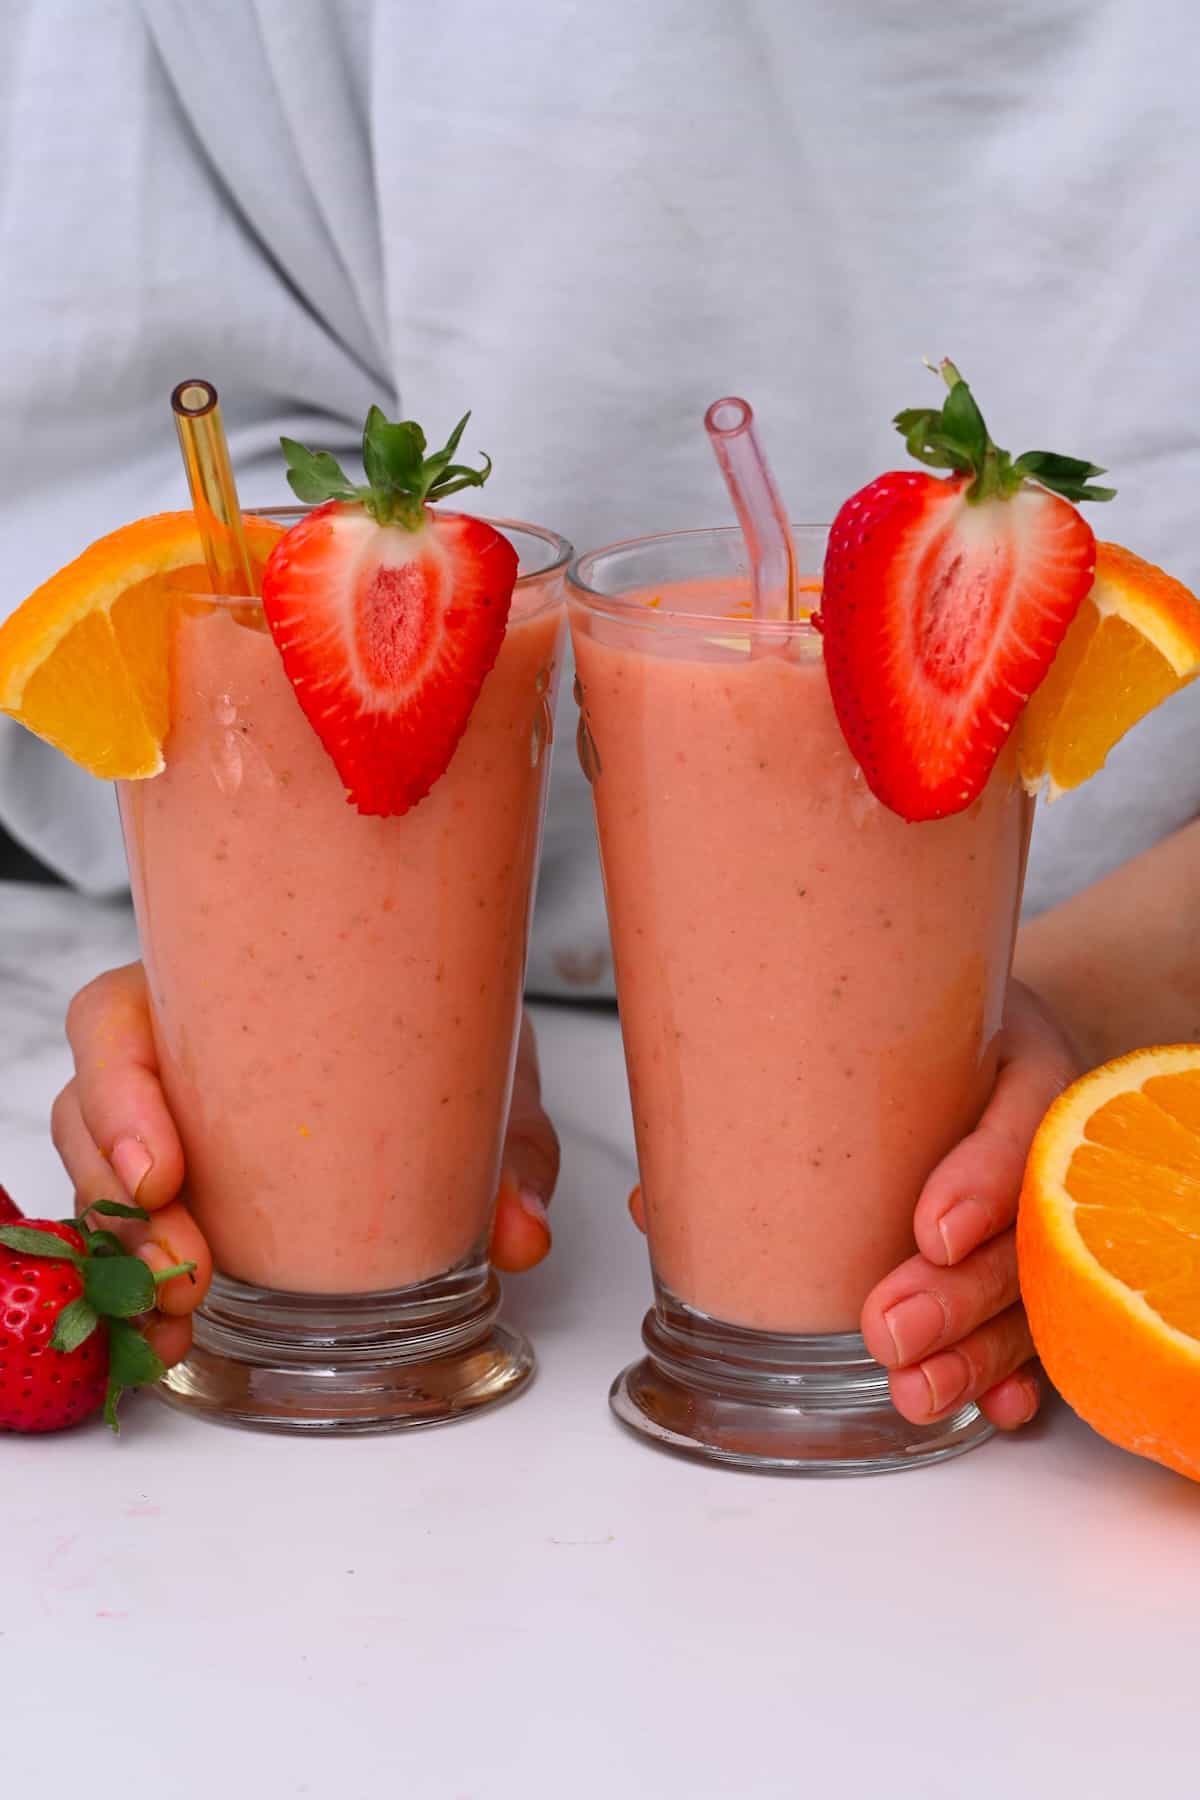 Two galsses with smoothies topped with strawberries and orange slices